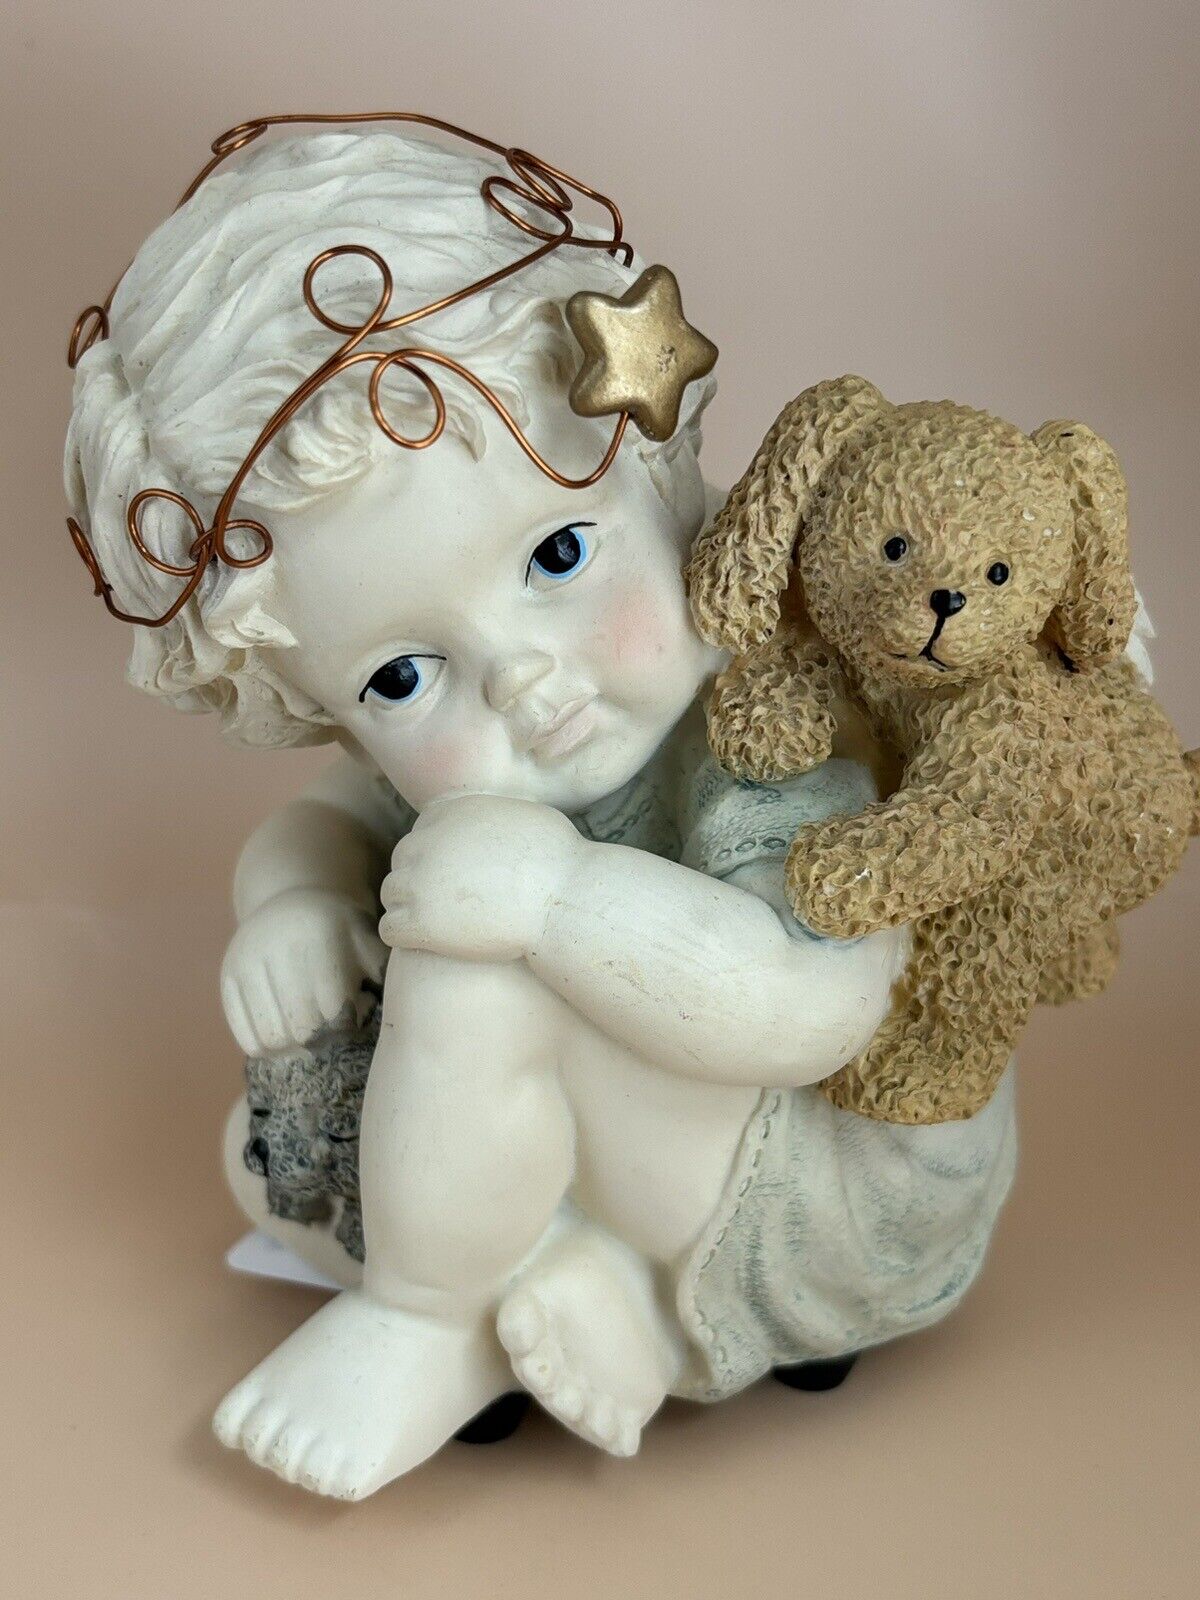 Vintage Musical Angel with Bear and Puppy Playing Brahms Lullaby, Cherub Angel